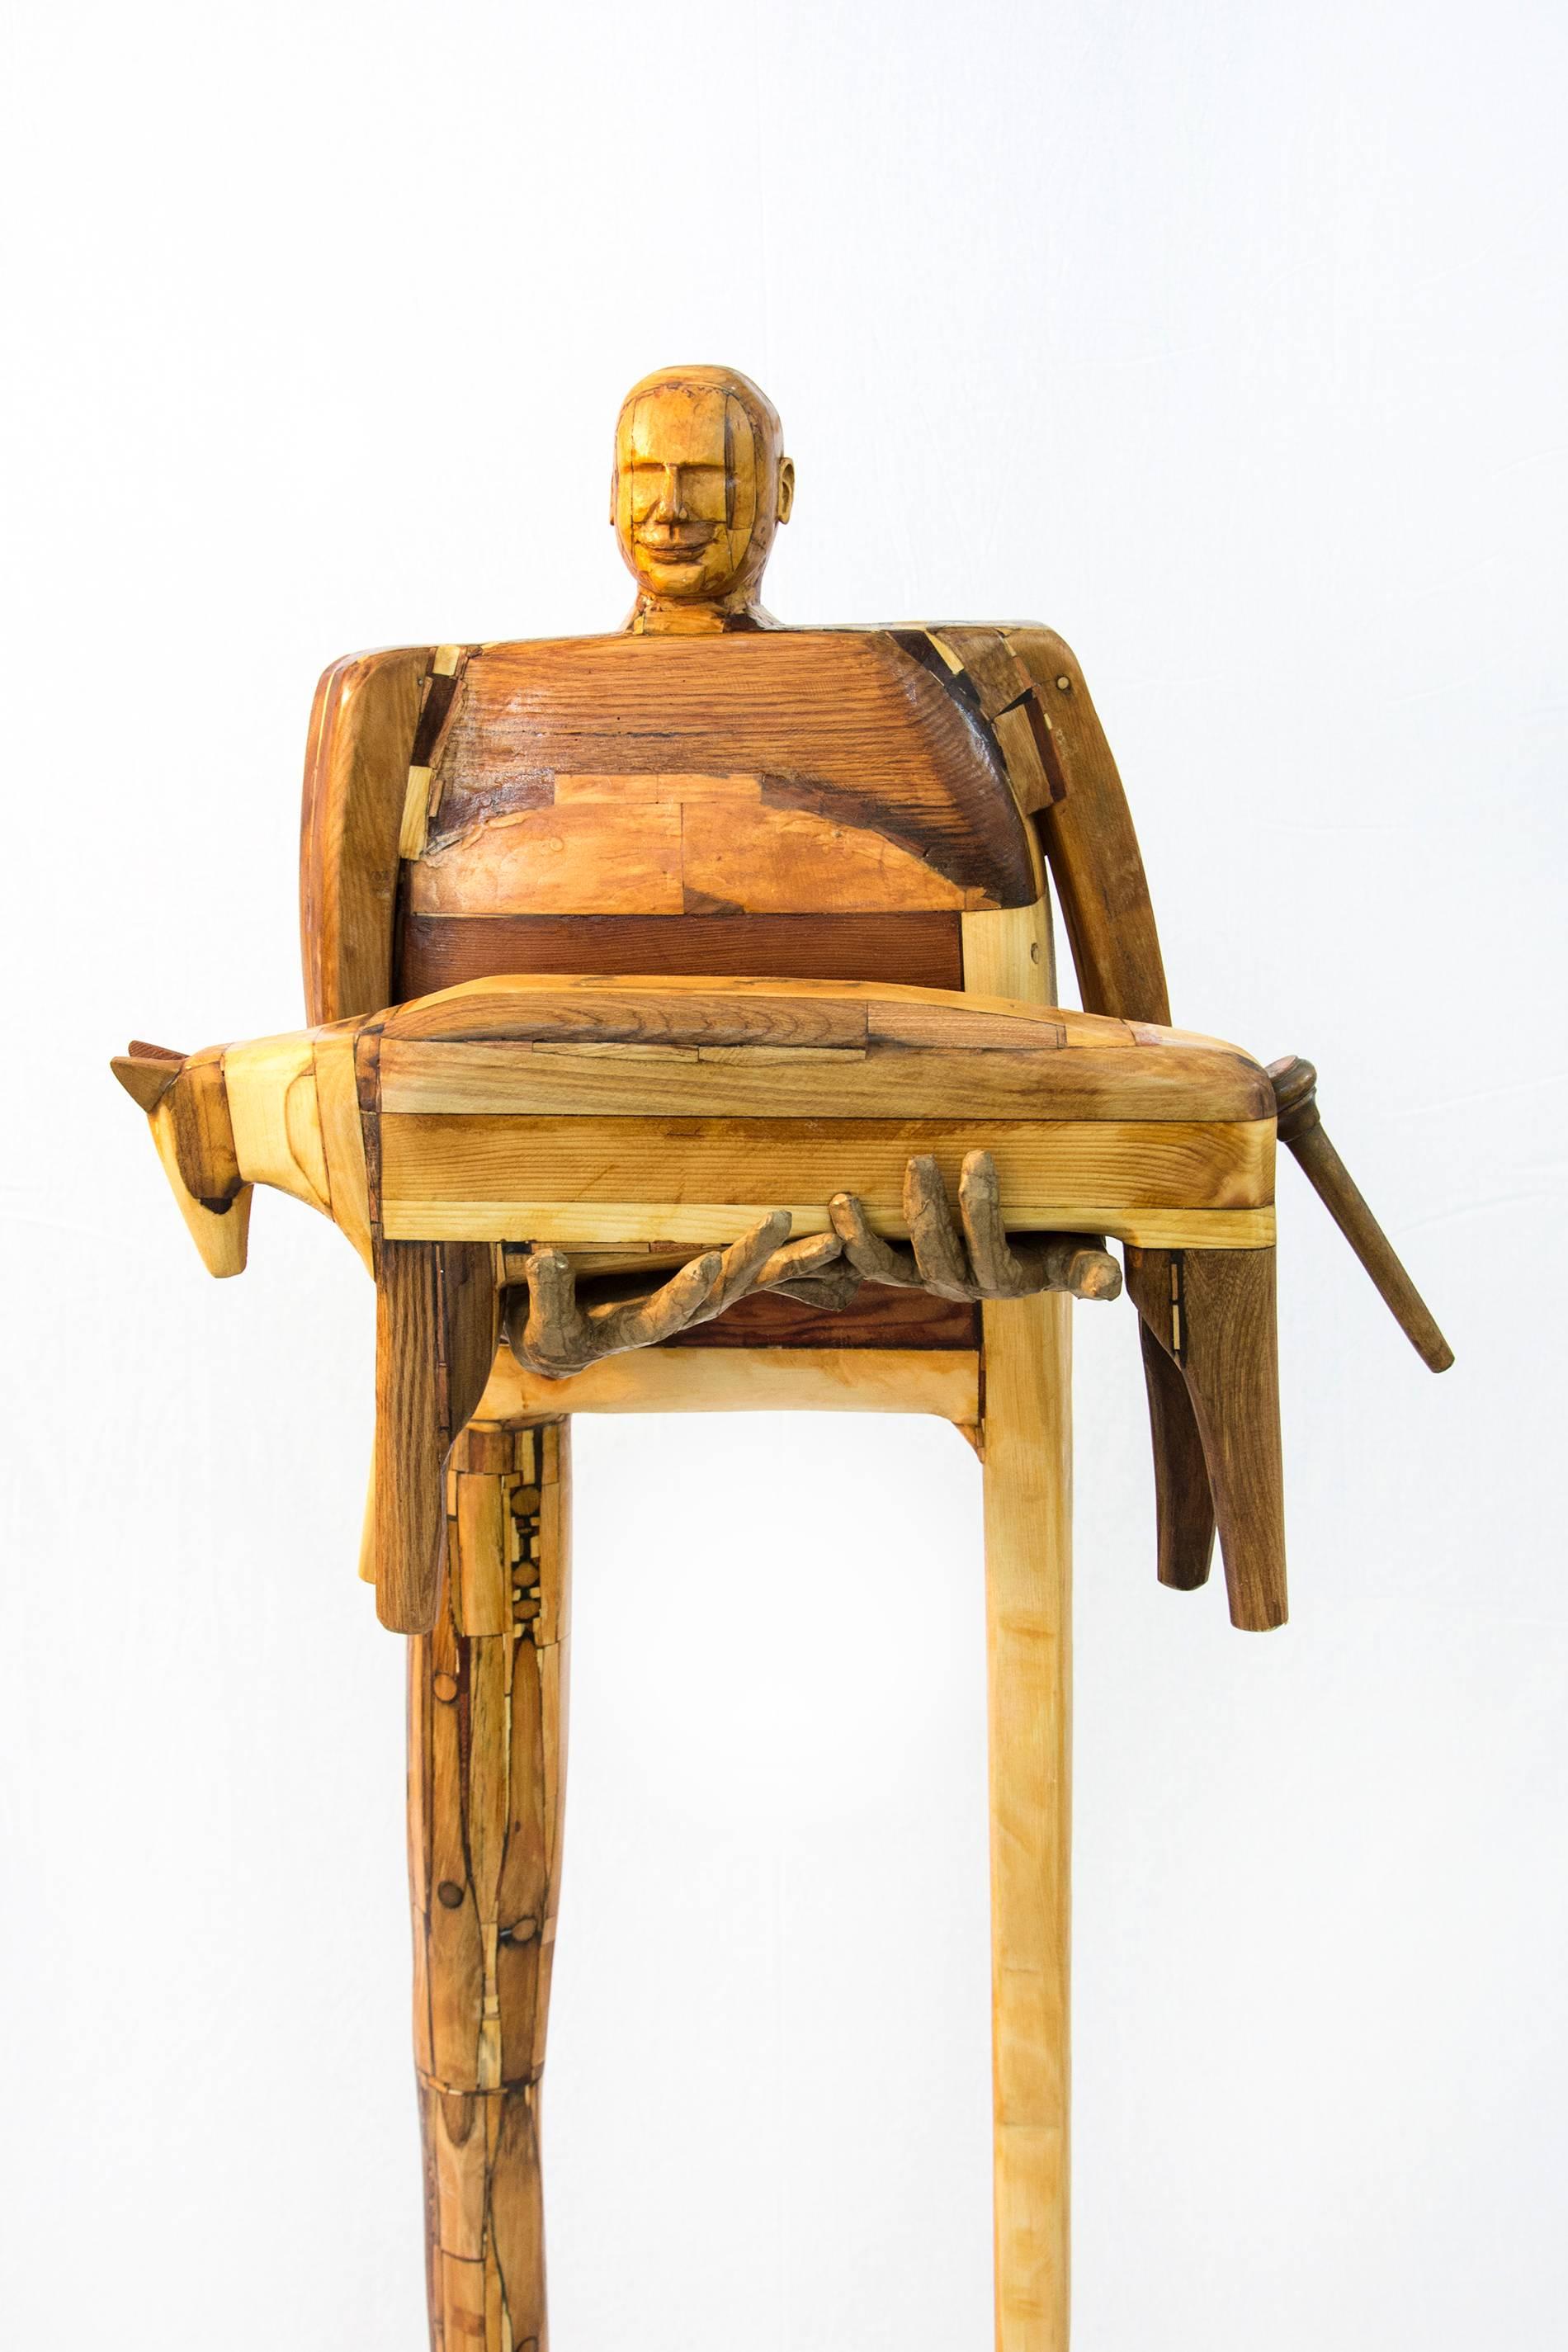 Reclaimed wood figure holding a pet dog. The dog can be lifted out of the figures hands. This sculpture is created out of reclaimed chairs, wood and found objects painstakingly layered with resin.

